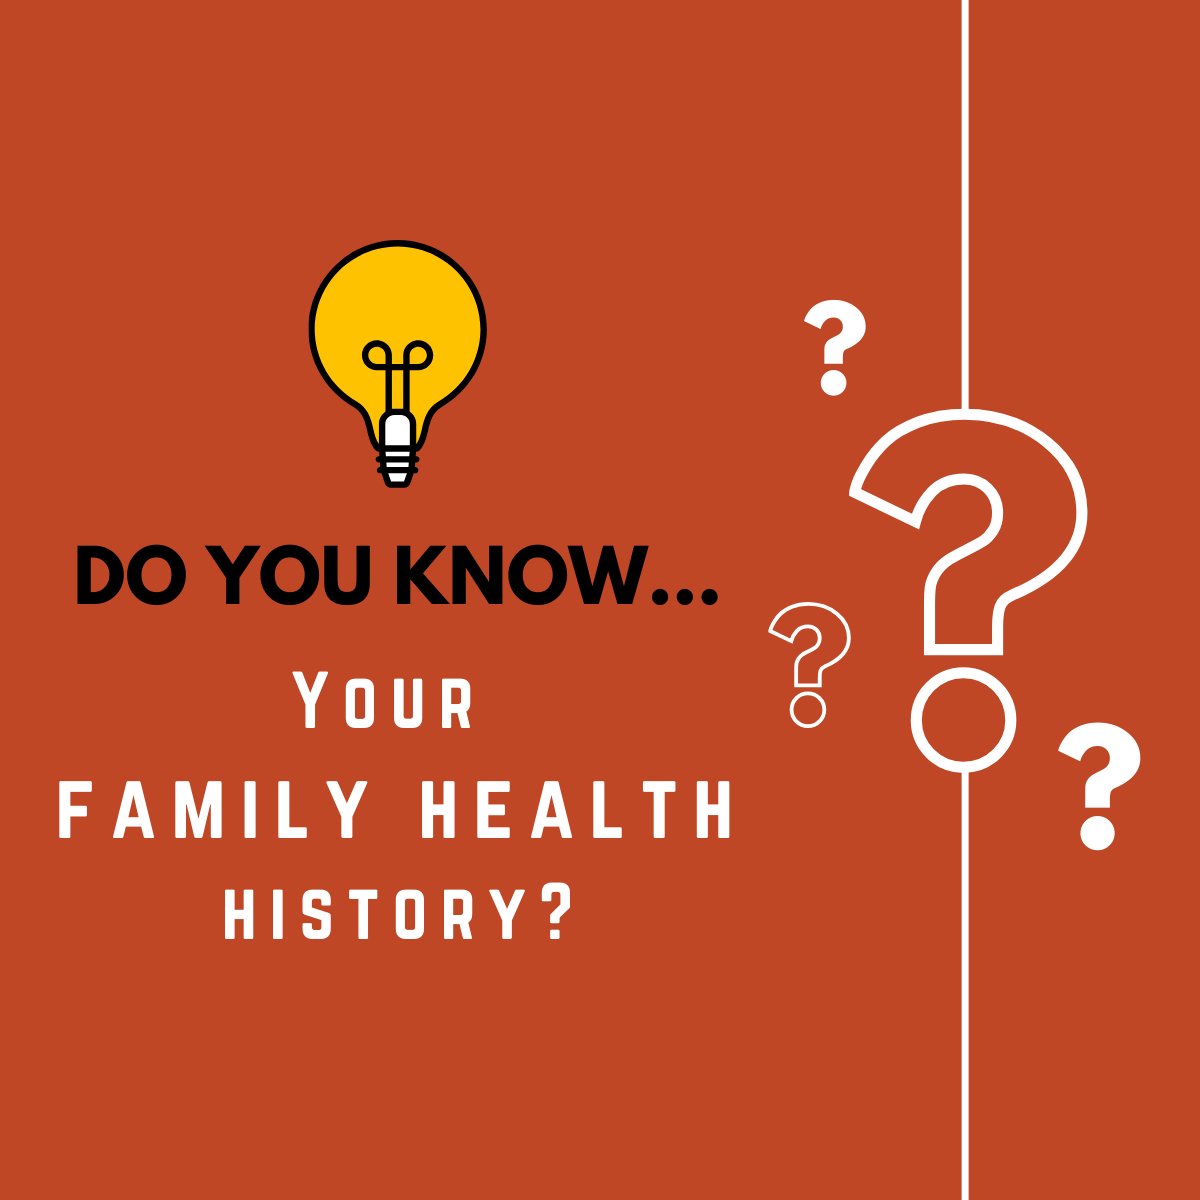 Knowing your #FamilyHealthHistory can be a big game-changer regarding your well-being. Have meaningful conversations with your loved ones. Keep a health journal to track any patterns or risks. Also, encourage the young ones in your family to participate in these conversations.